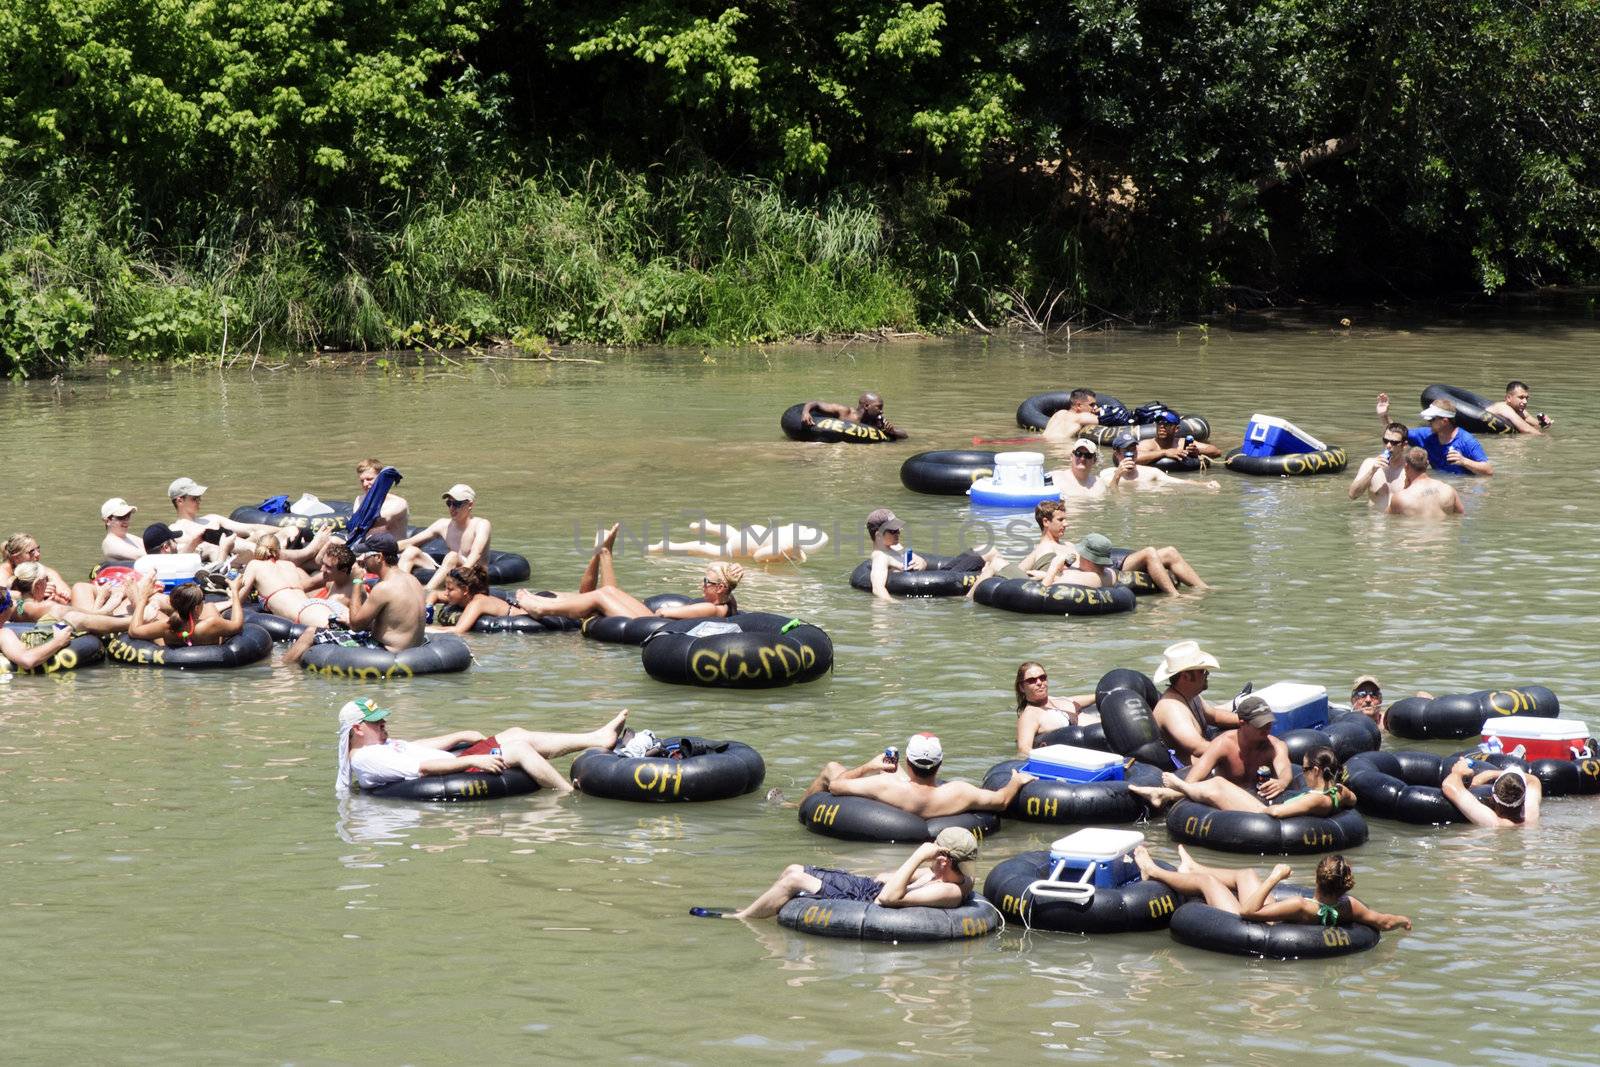 NEW BRAUNFELS, TX – MAY 2009:  Several people flowing down the Guadalupe River known for its large increased visitor traffic for the summer time.  Tubers where taken on May 30th, 2009 in New Braunfels, Texas.